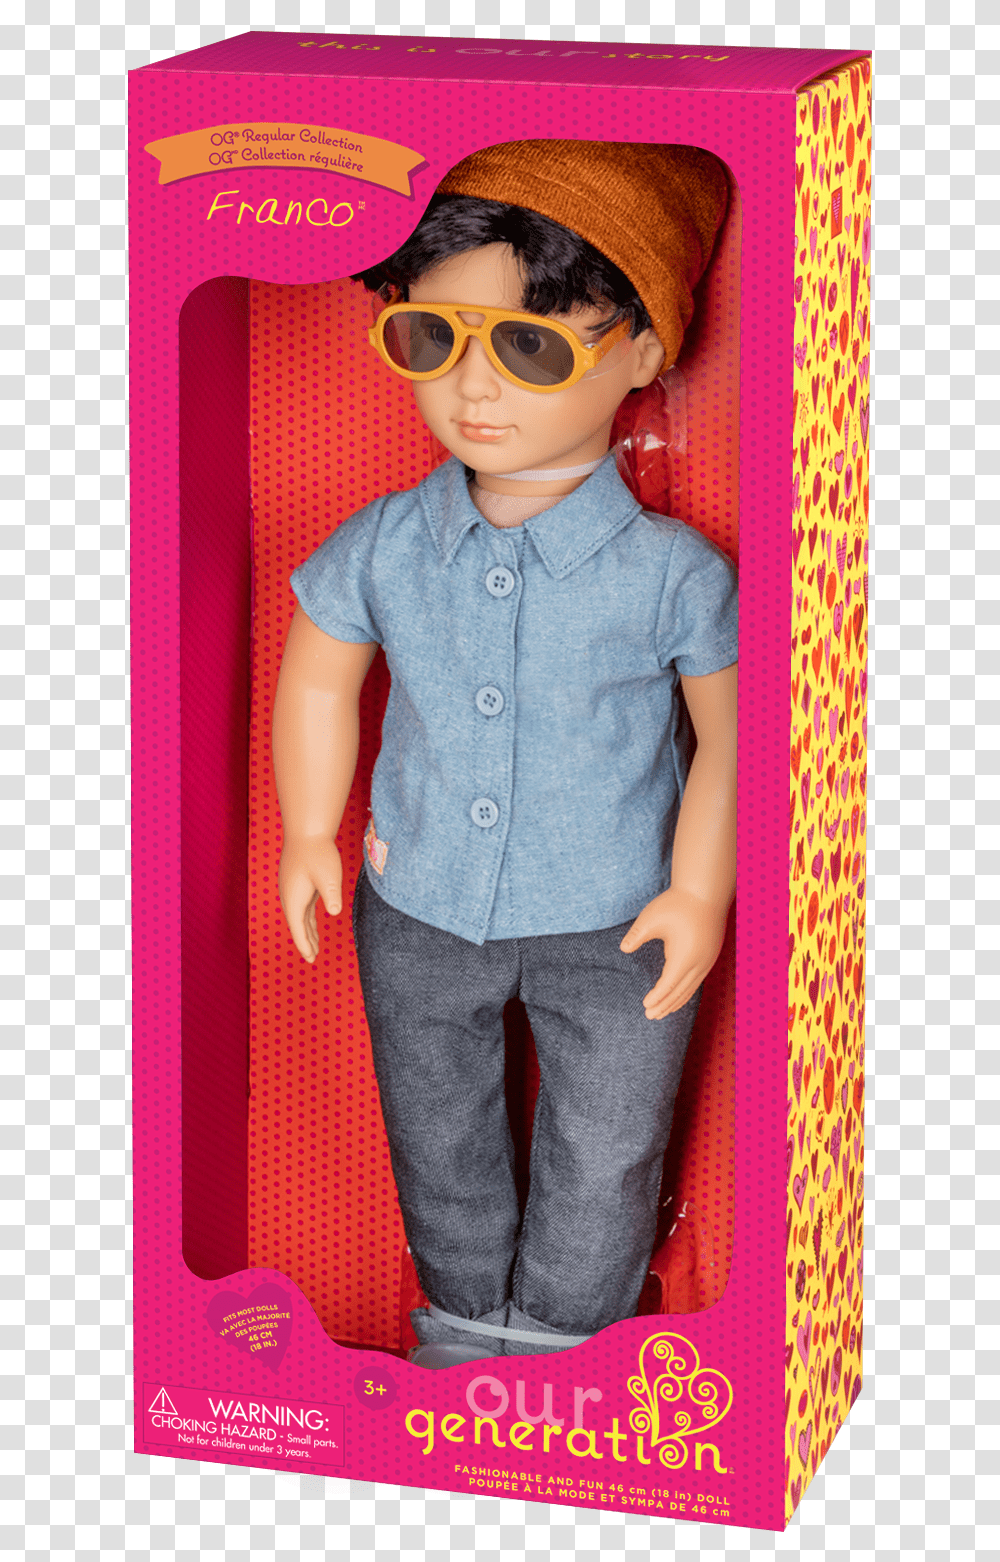 Franco Regular 18 Inch Boy Doll In Packaging Our Generation Boy Doll Franco, Toy, Sunglasses, Accessories, Accessory Transparent Png